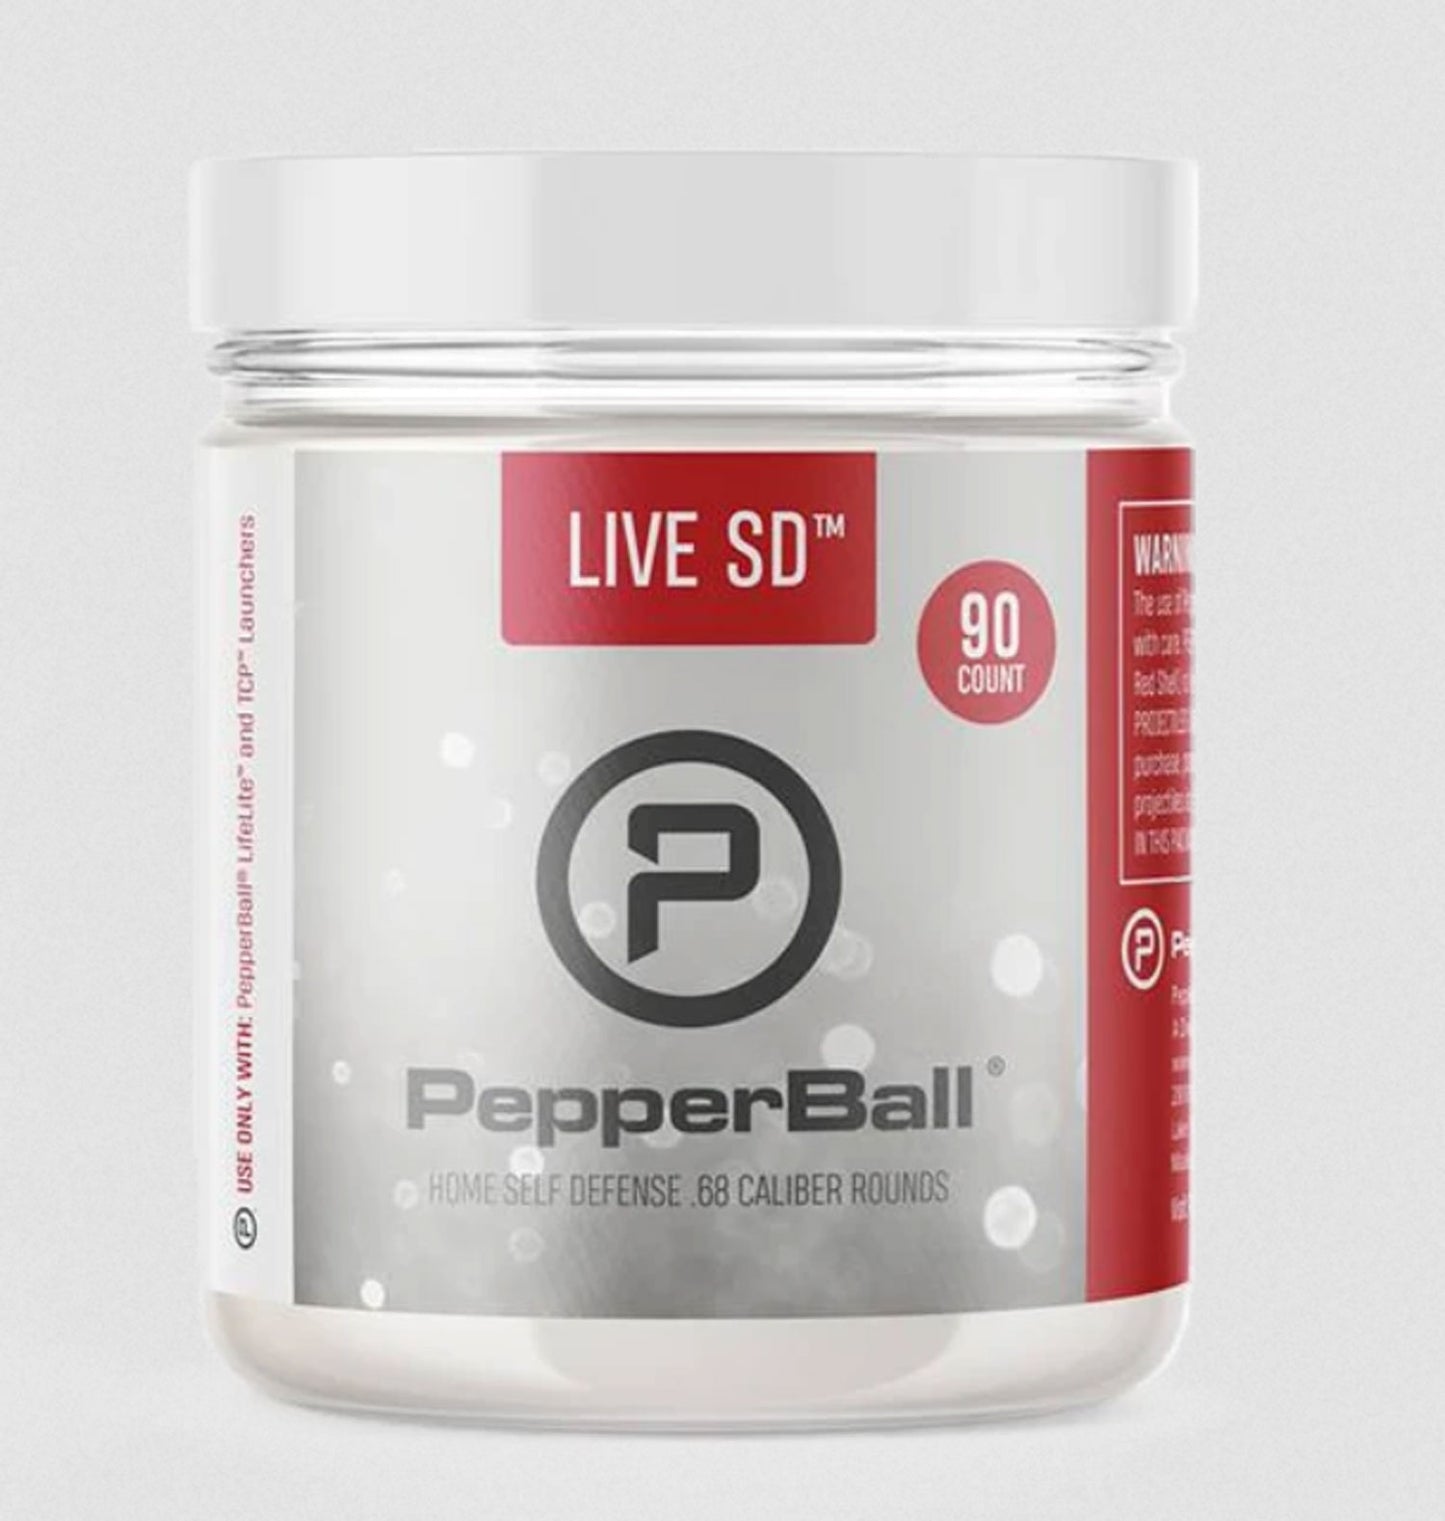 PepperBall Live SD Projectiles - 90 Rounds - Pepperball